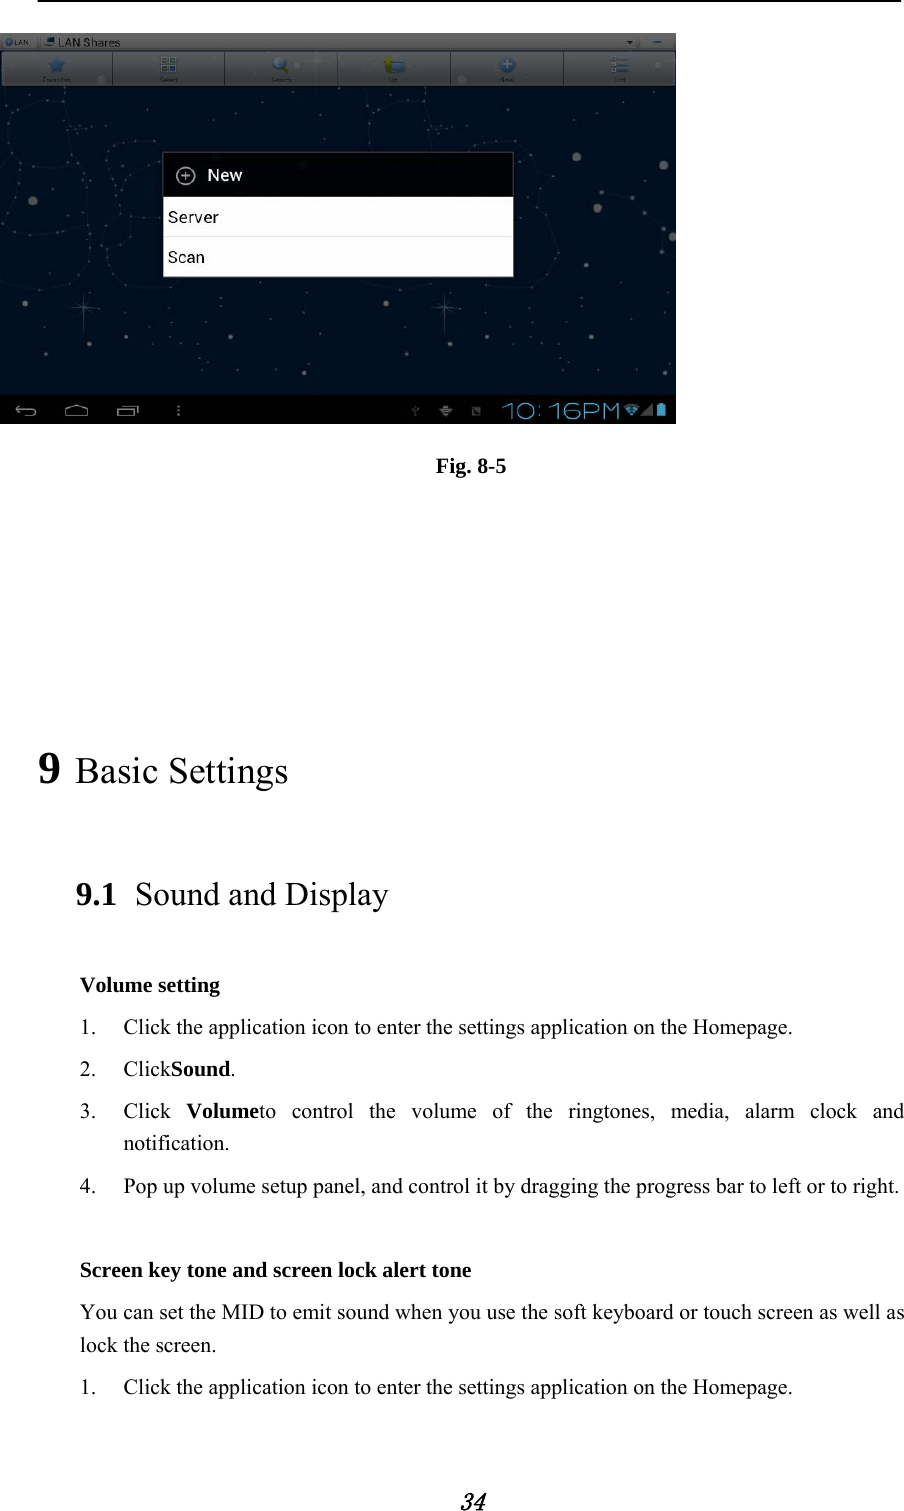     34  Fig. 8-5     9 Basic Settings 9.1 Sound and Display Volume setting 1. Click the application icon to enter the settings application on the Homepage. 2. ClickSound. 3. Click  Volumeto control the volume of the ringtones, media, alarm clock and notification. 4. Pop up volume setup panel, and control it by dragging the progress bar to left or to right.  Screen key tone and screen lock alert tone You can set the MID to emit sound when you use the soft keyboard or touch screen as well as lock the screen. 1. Click the application icon to enter the settings application on the Homepage. 